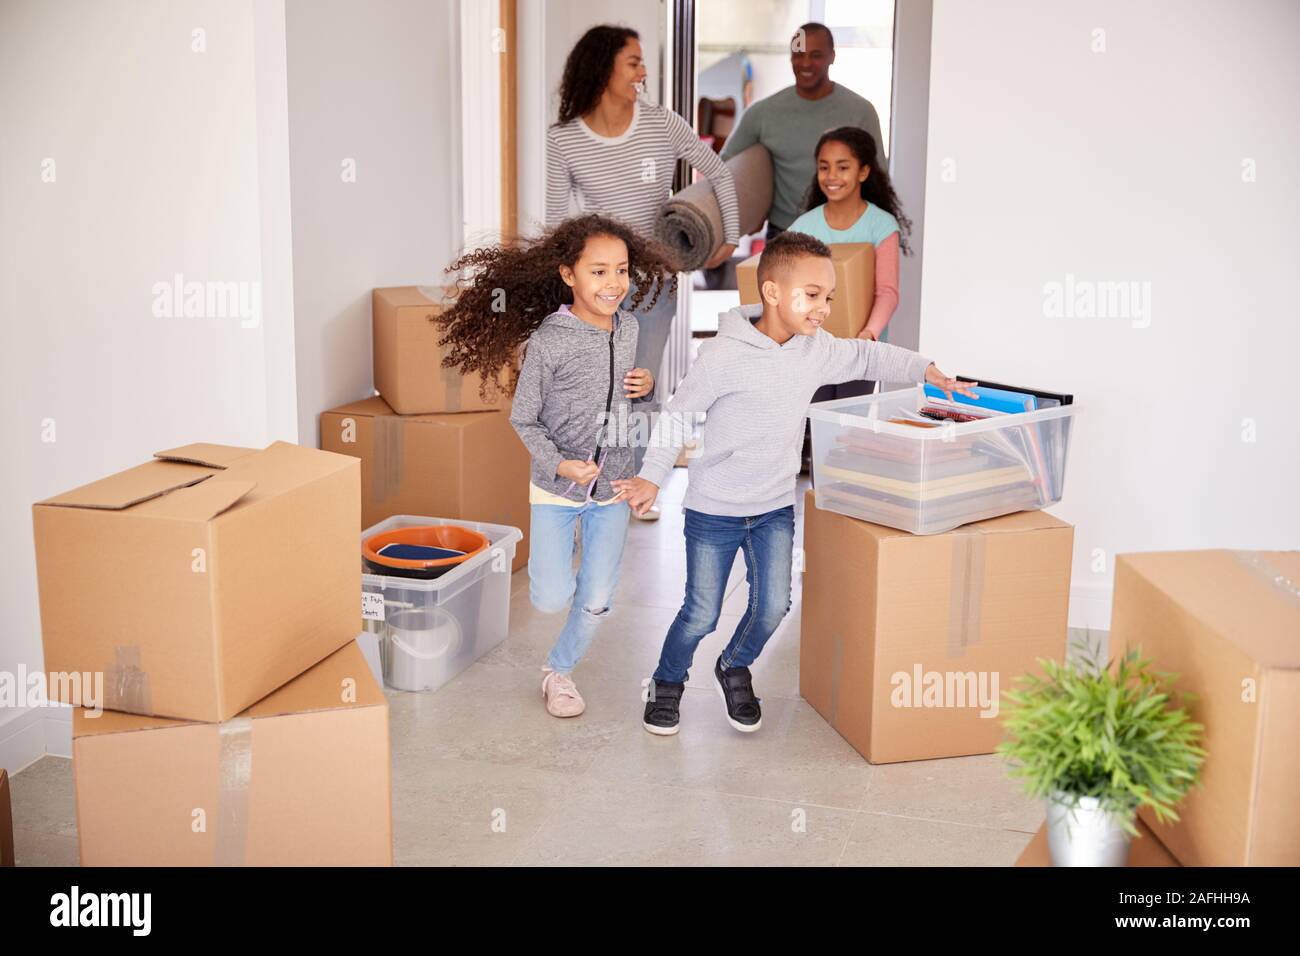 Smiling Family Carrying Boxes Into New Home On Moving Day Stock Photo